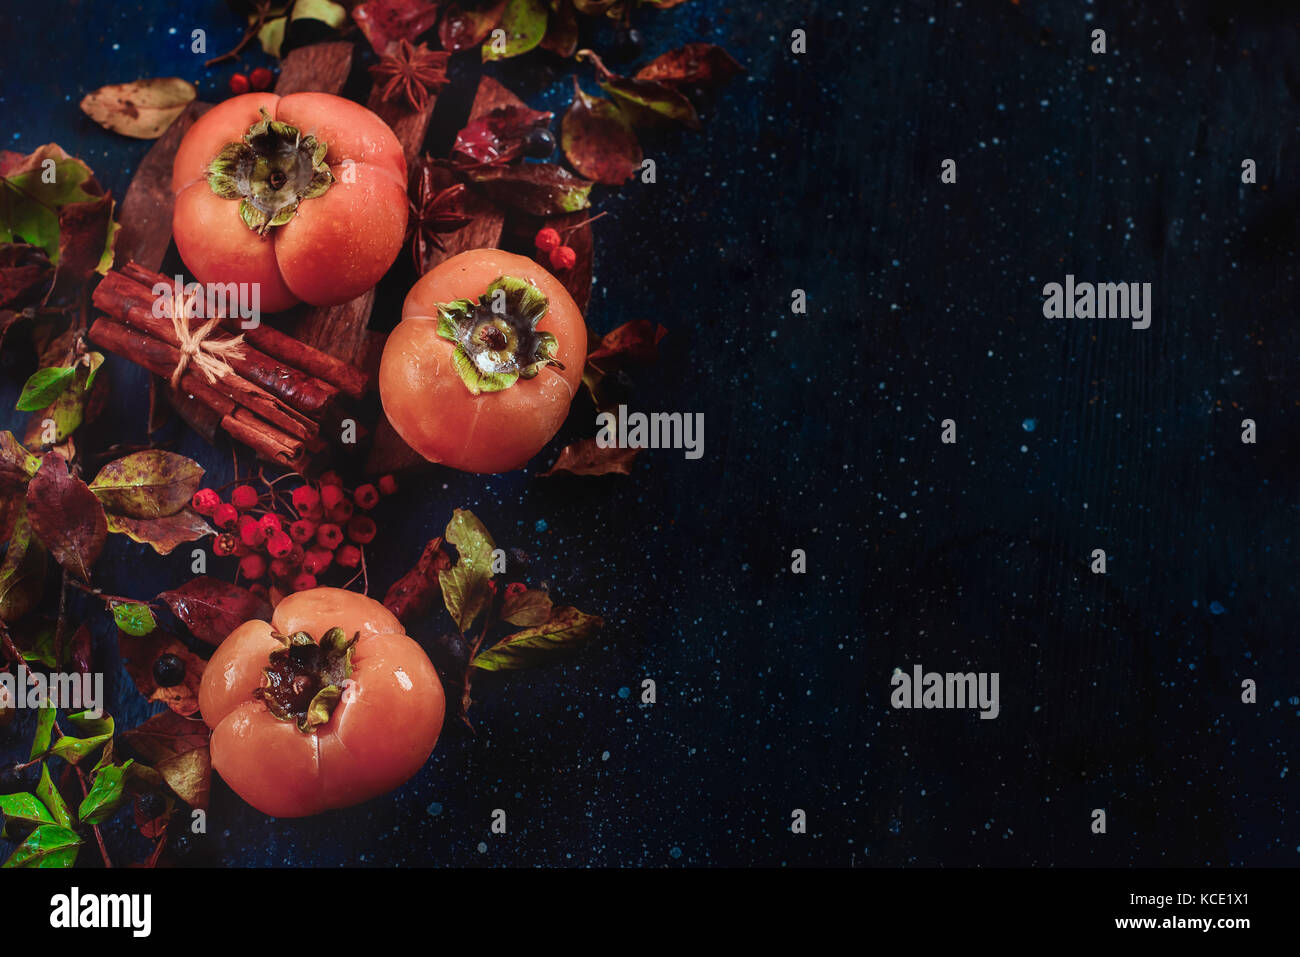 Ripe persimmons on a dark wooden background with autumn leaves, berries and cinnamon. Flat lay with copy space. Fruit in dark food photography. Stock Photo